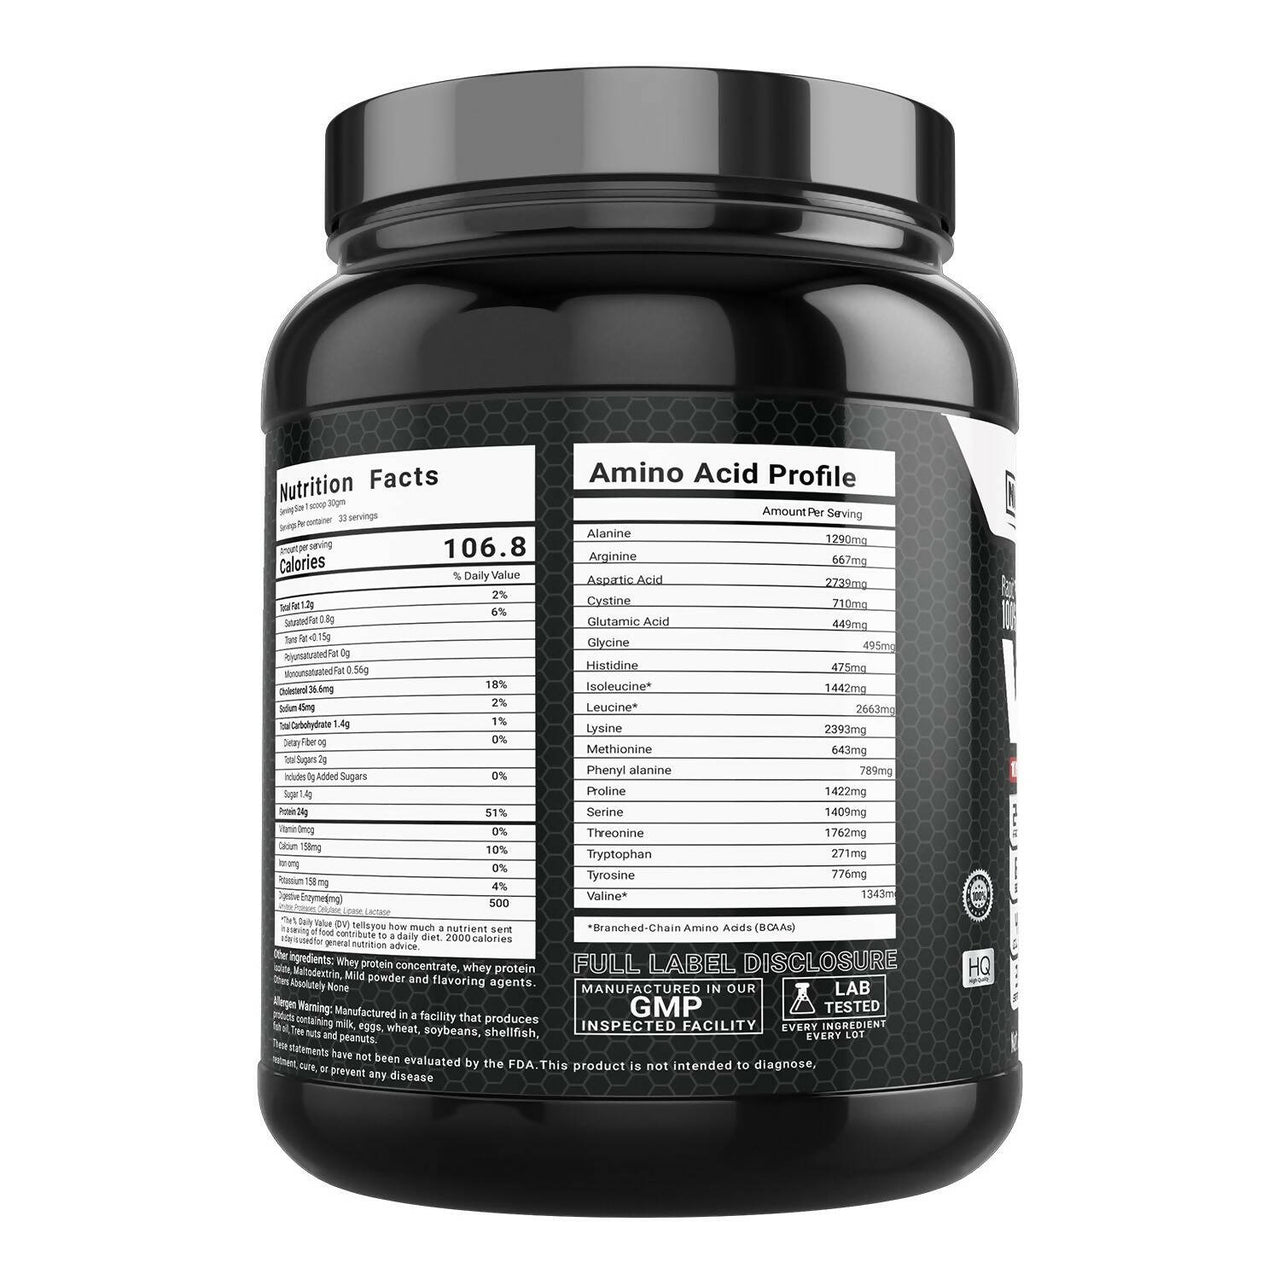 Nutracology Whey Core Whey Protein For Muscle Strength & Stamina - Distacart